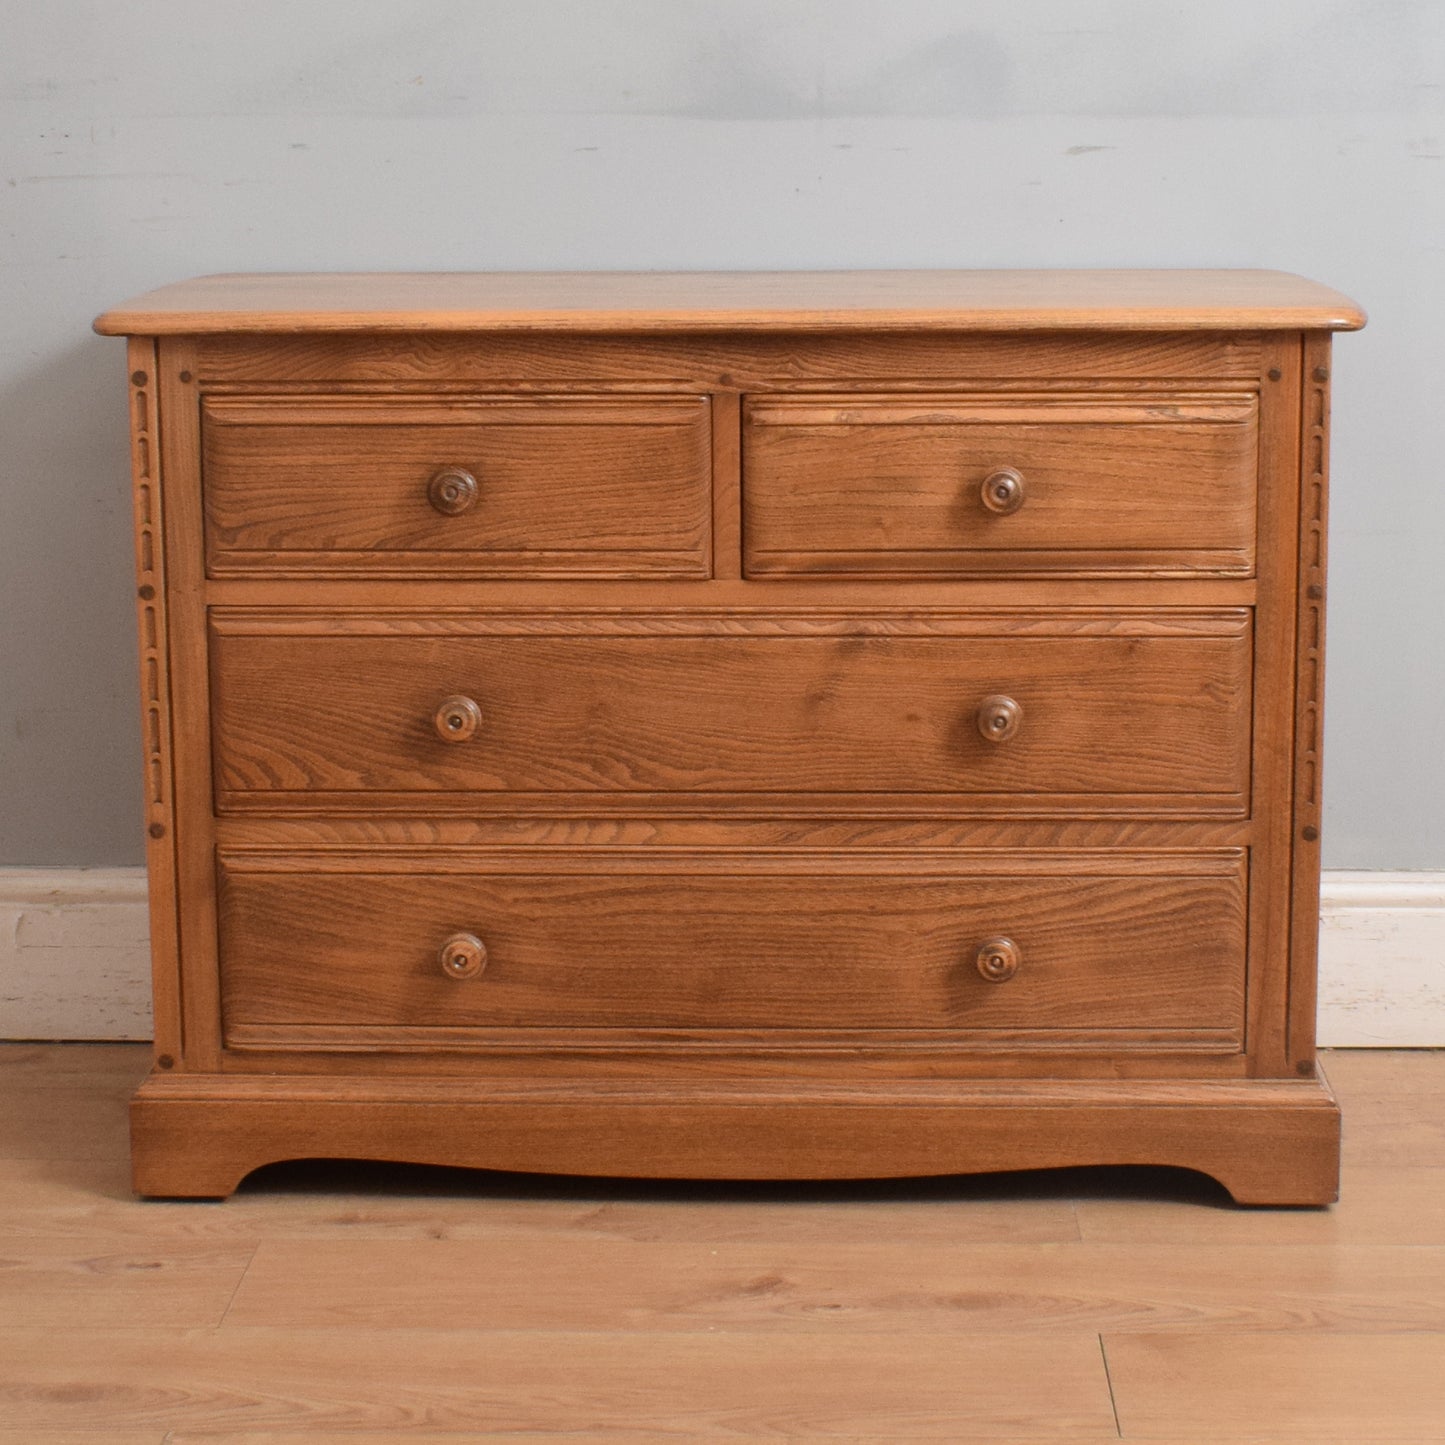 Restored Ercol Chest of Drawers